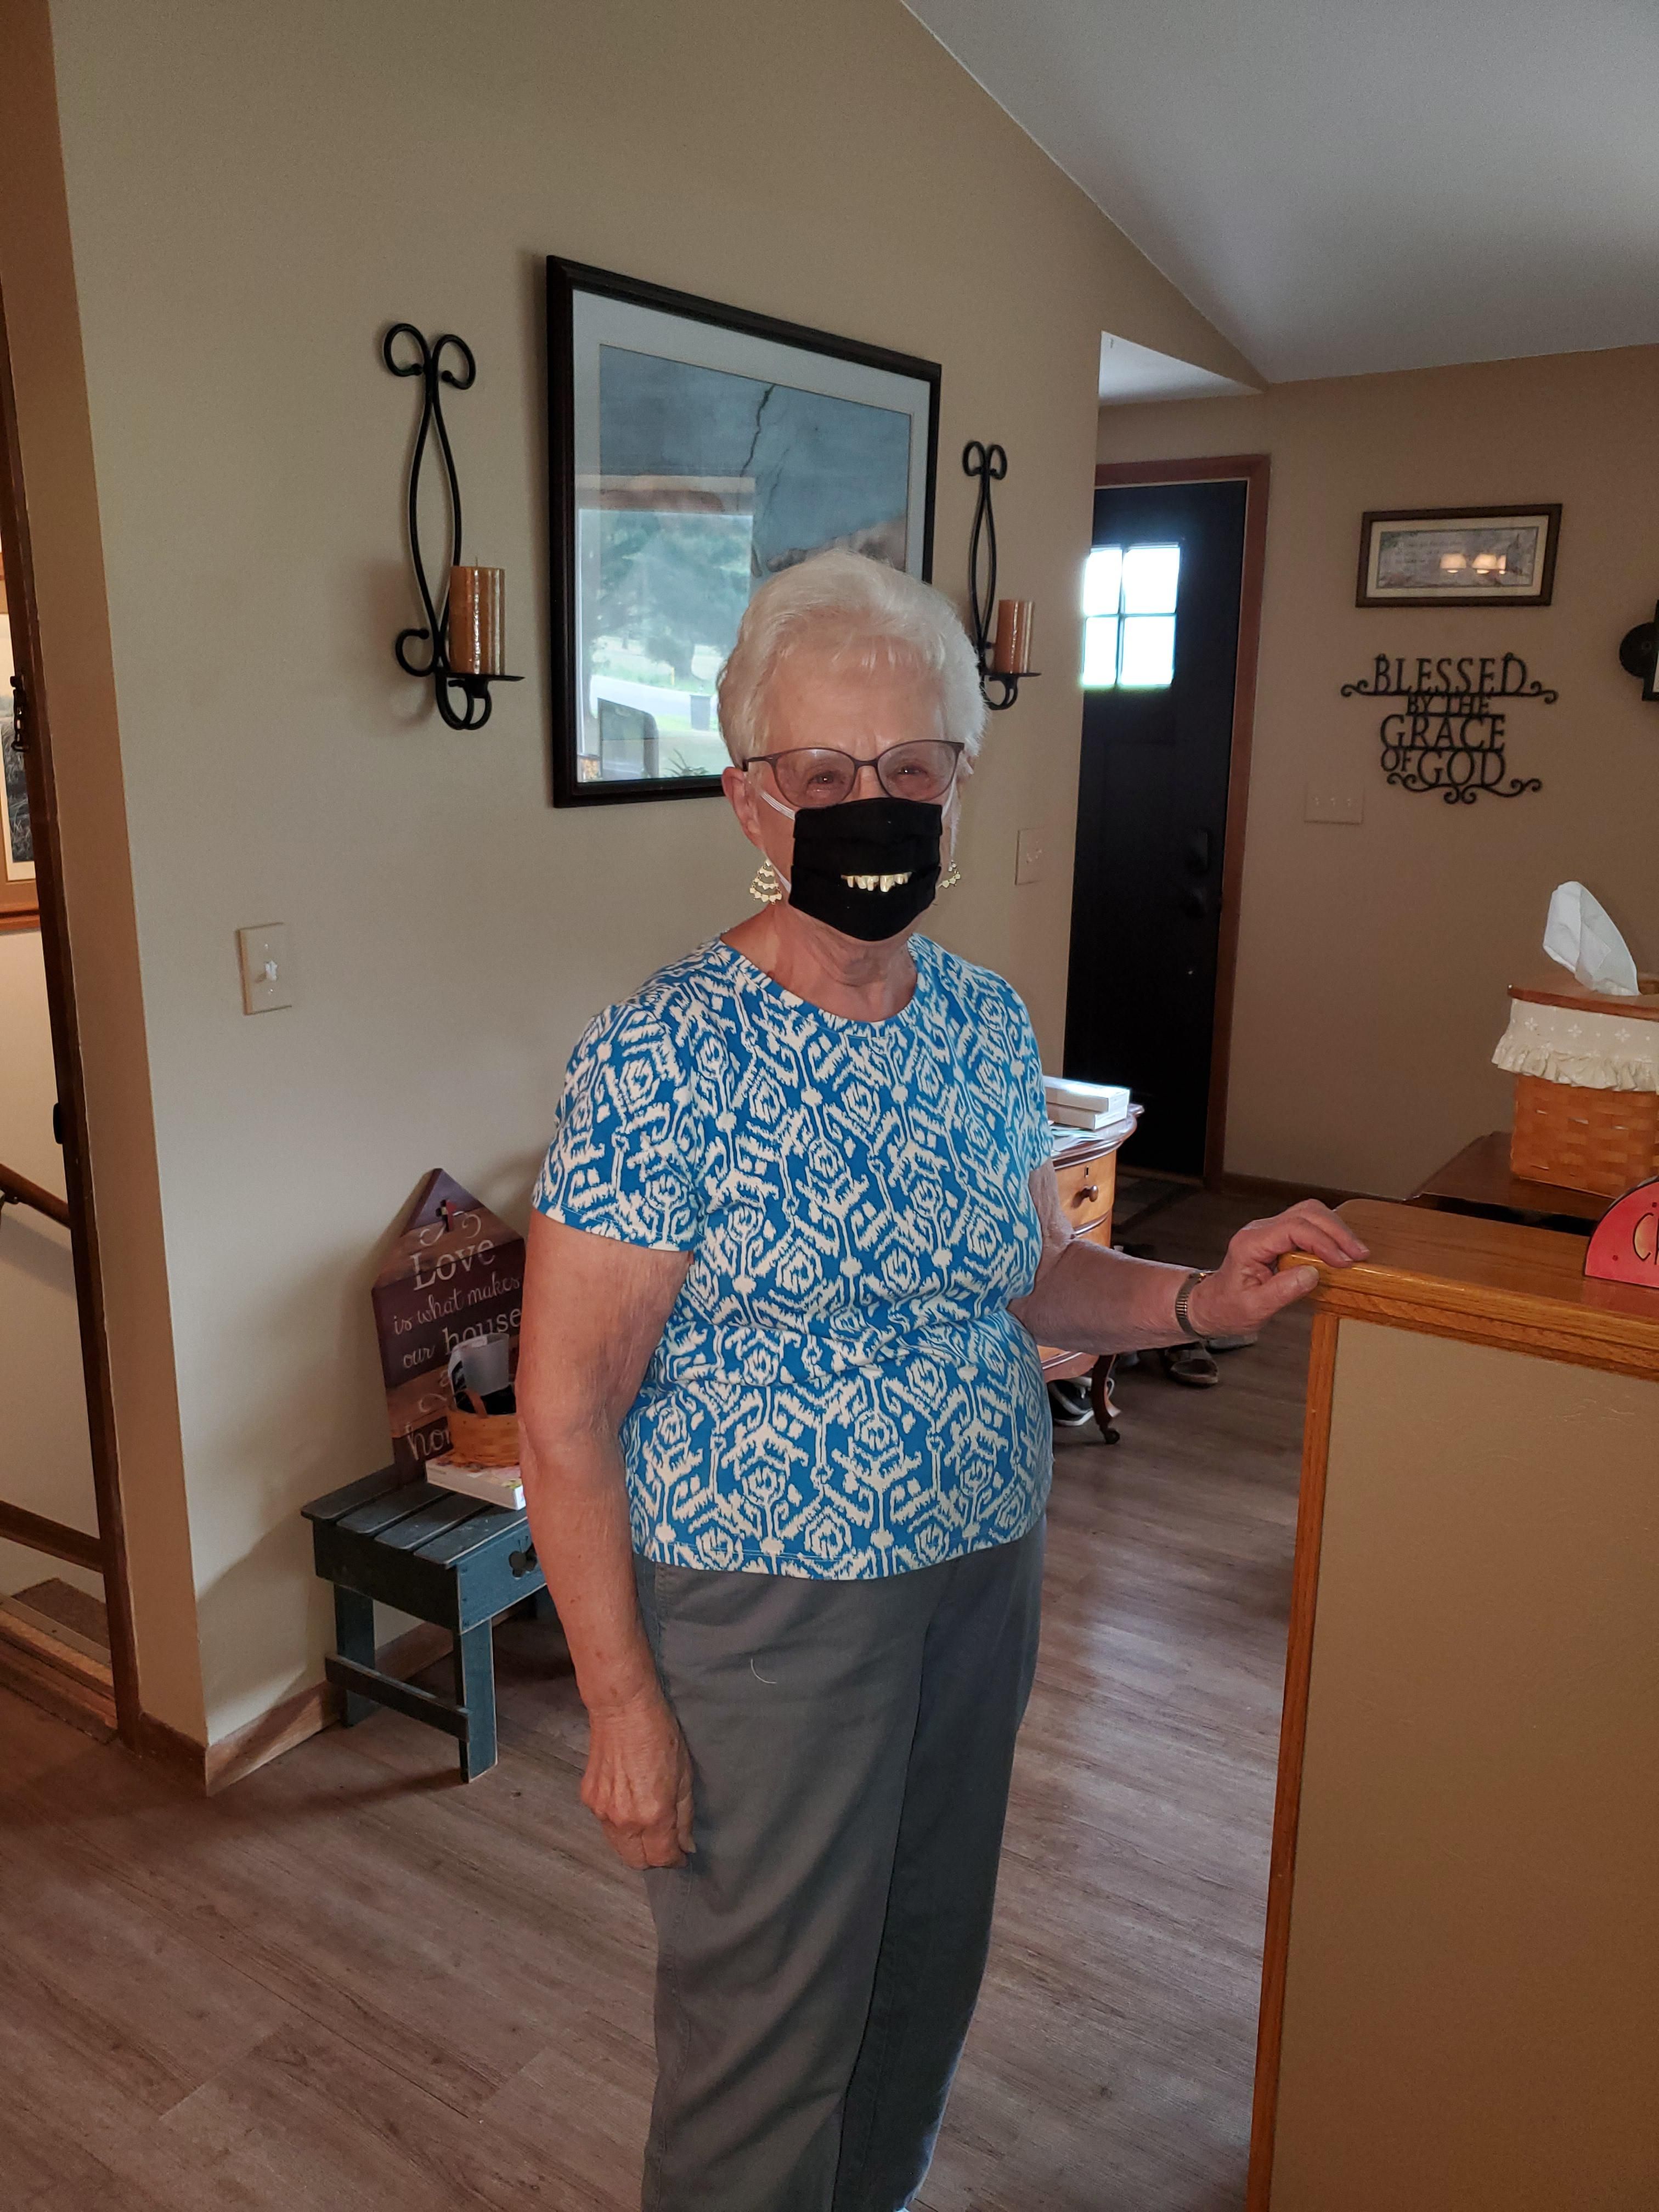 Went to my grandmas to celebrate her 90th birthday. She wanted to show off the new mask she made